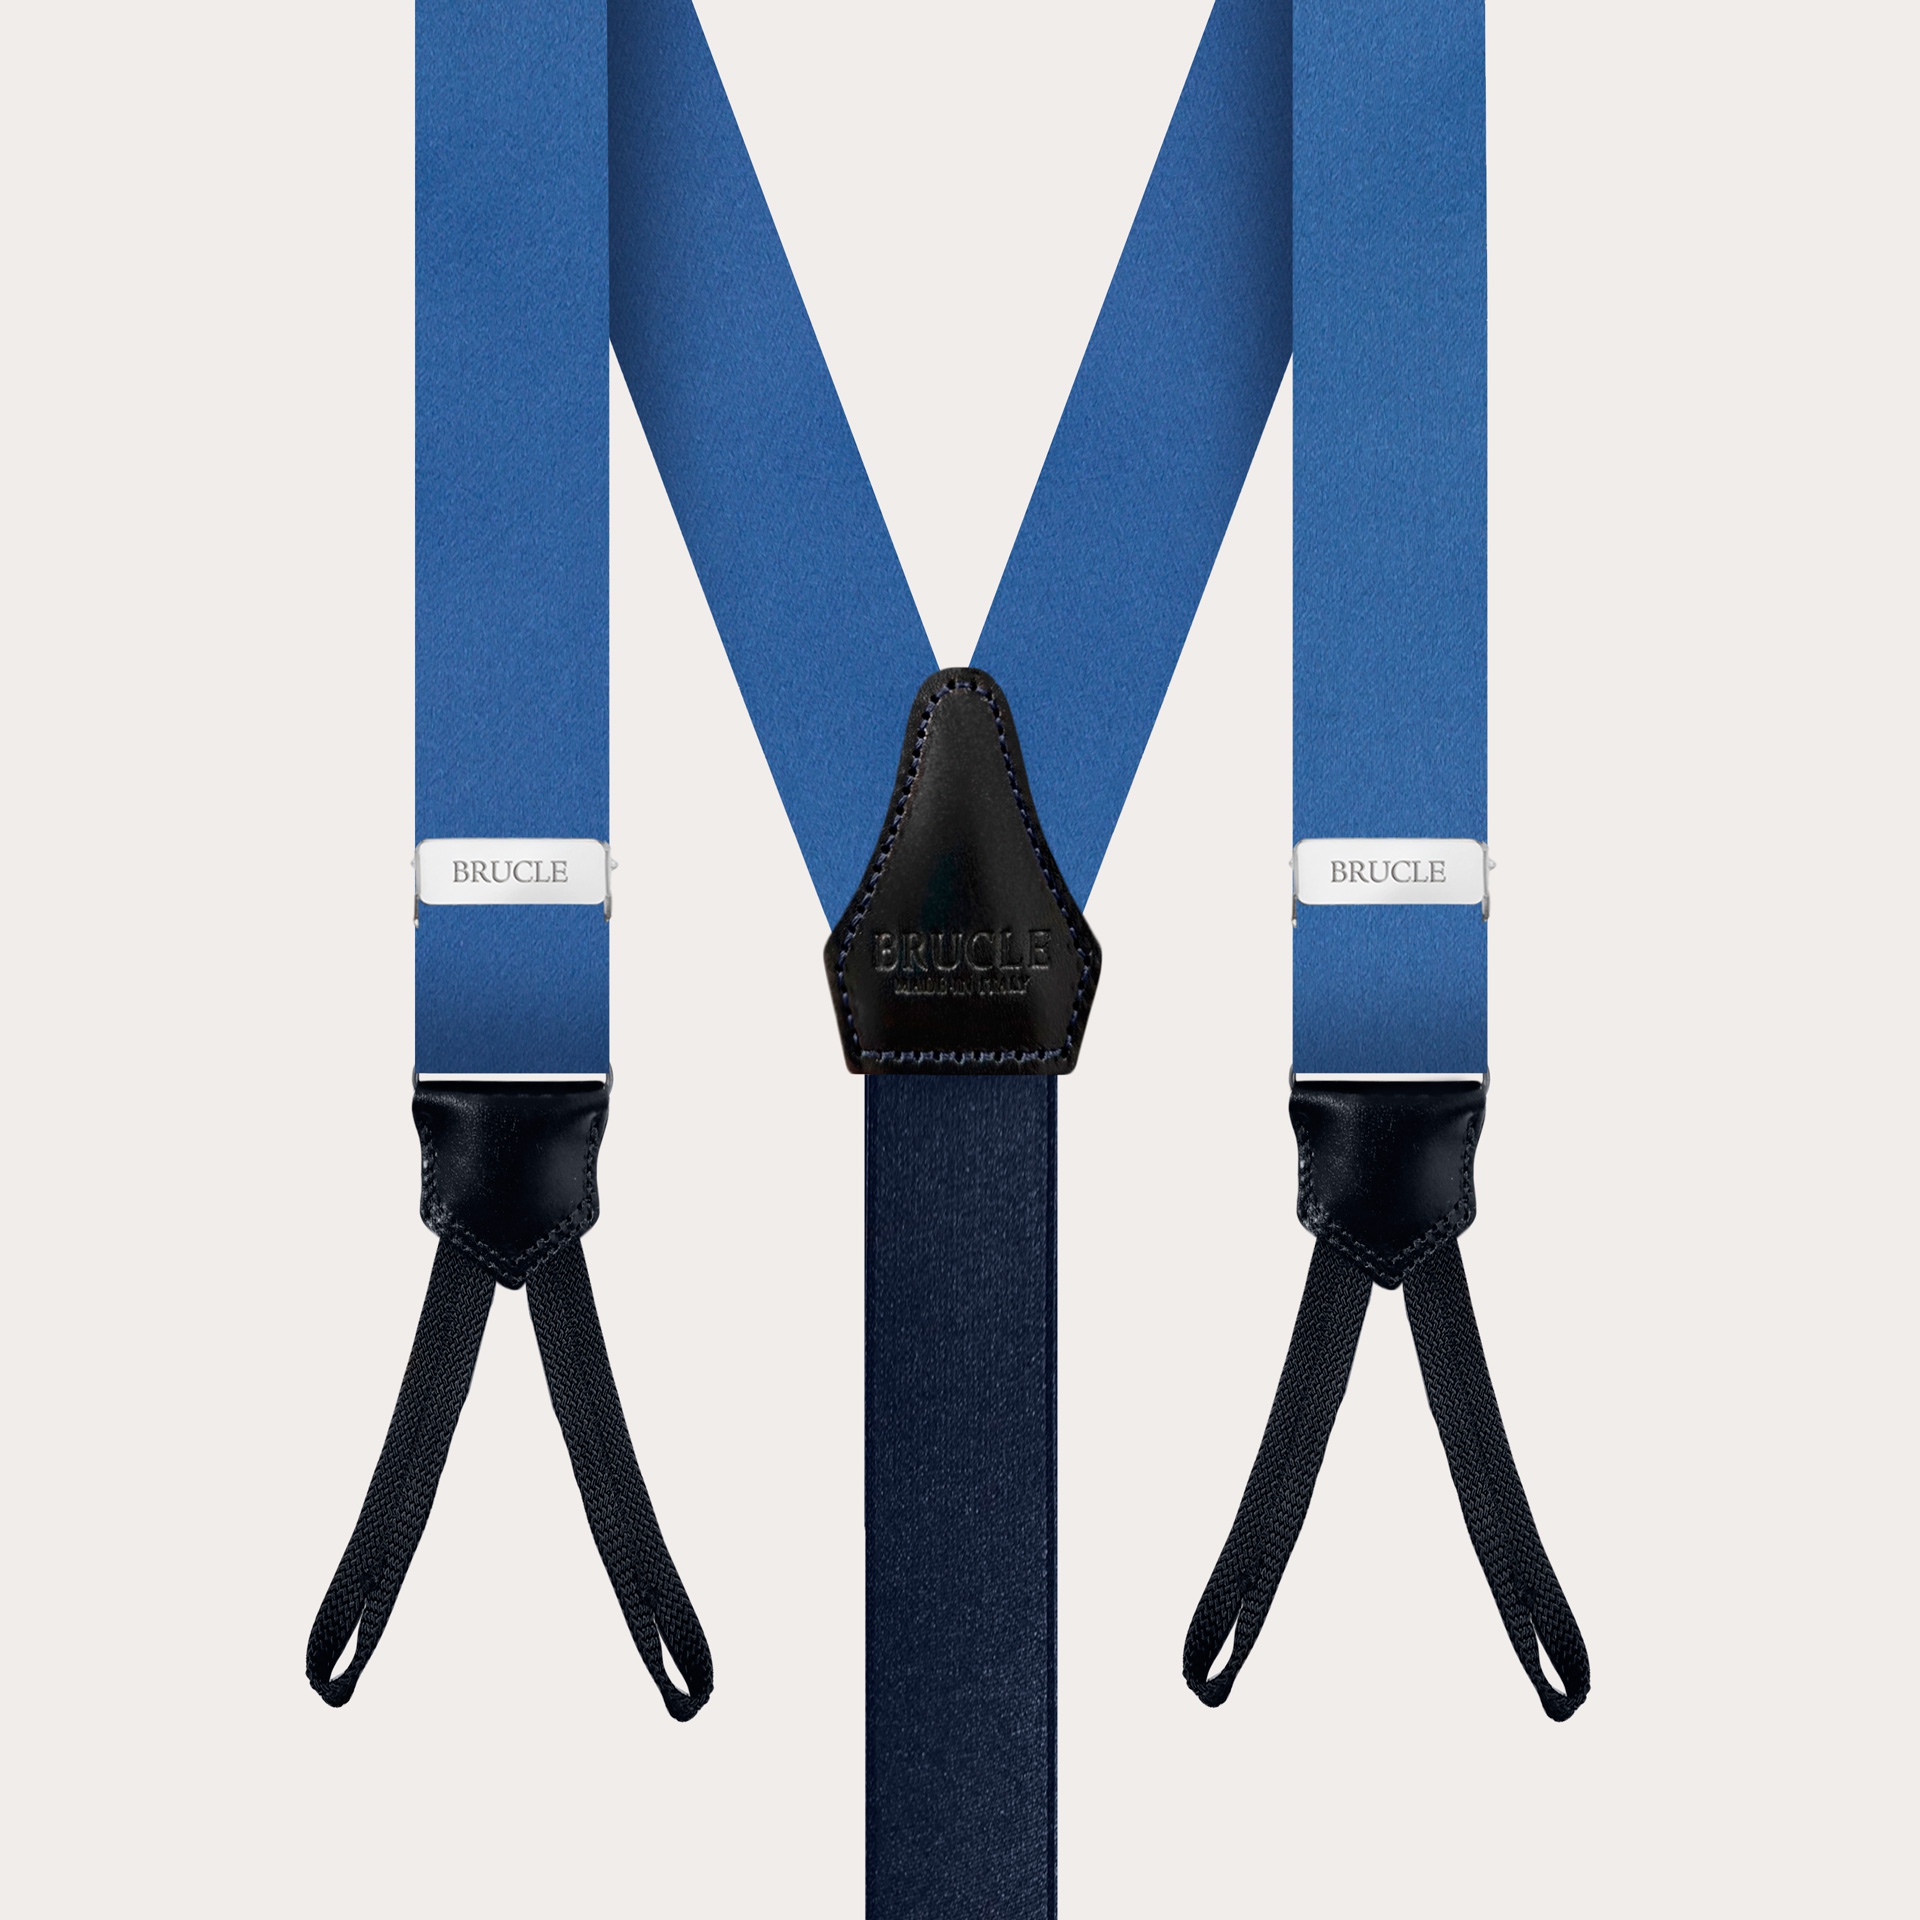 BRUCLE Suspenders in light blue silk satin with buttonholes